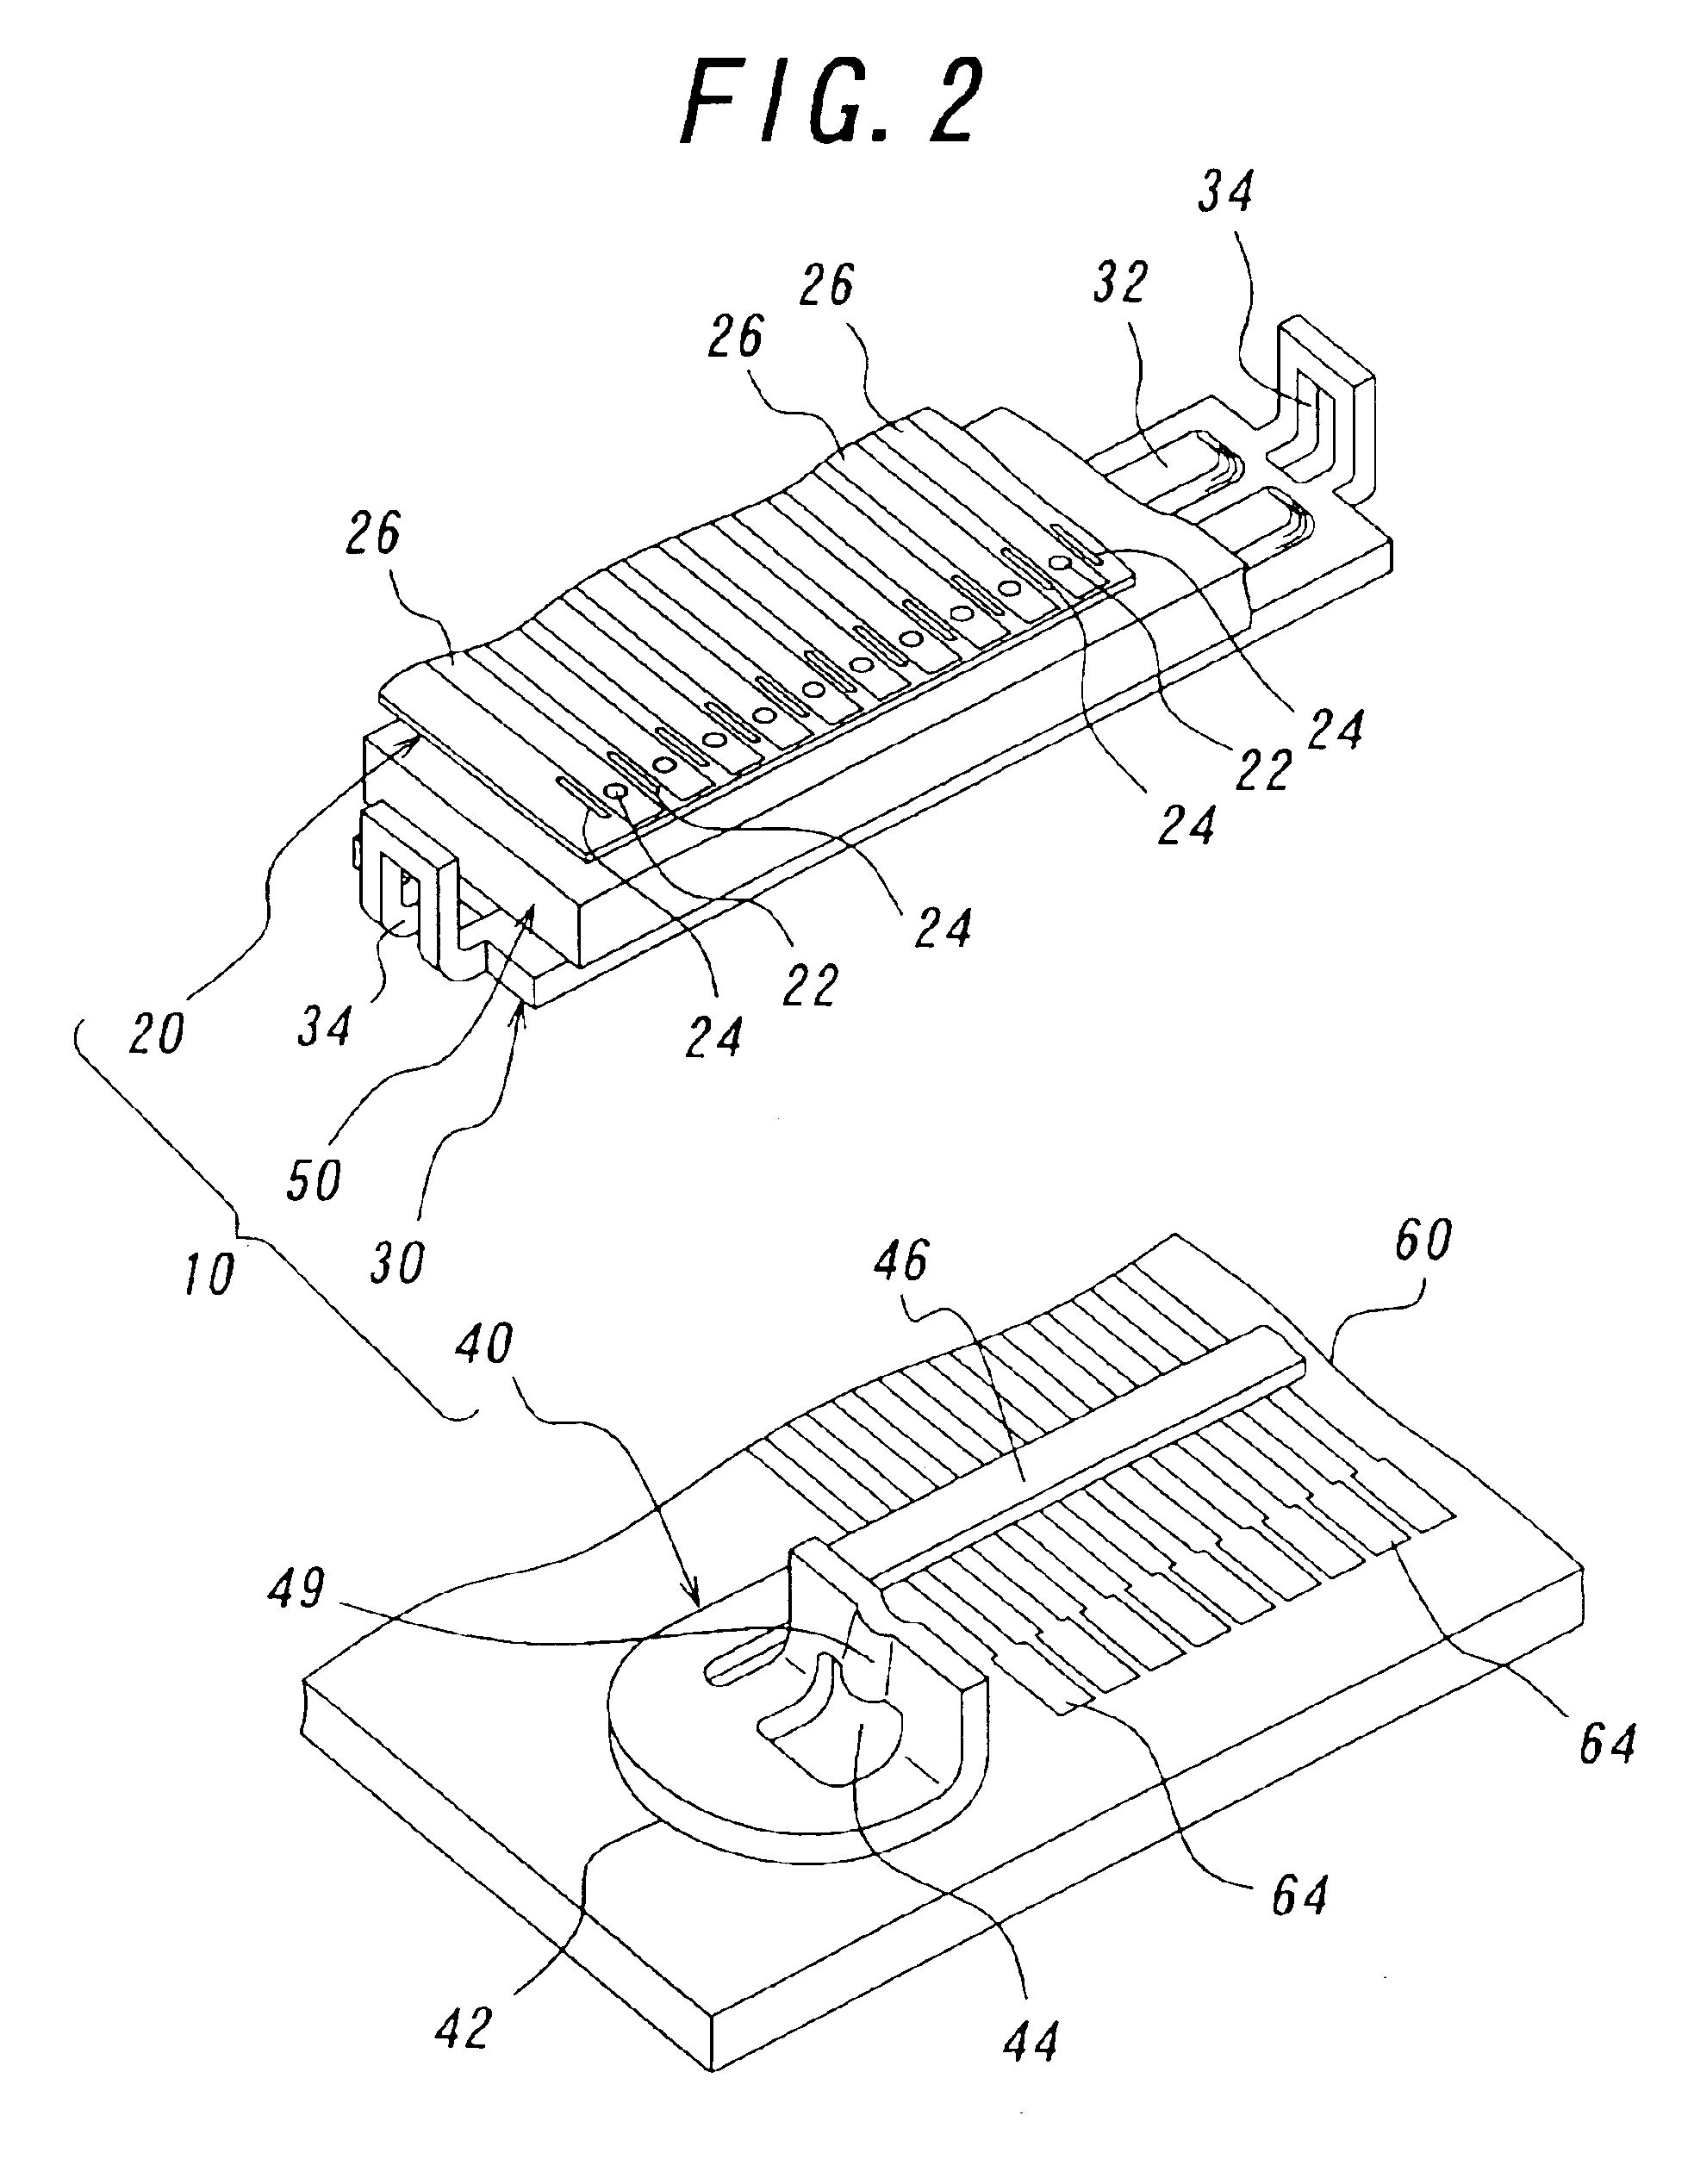 Flat and thin connector for electrically connecting a flexible printed circuit board and a hard board